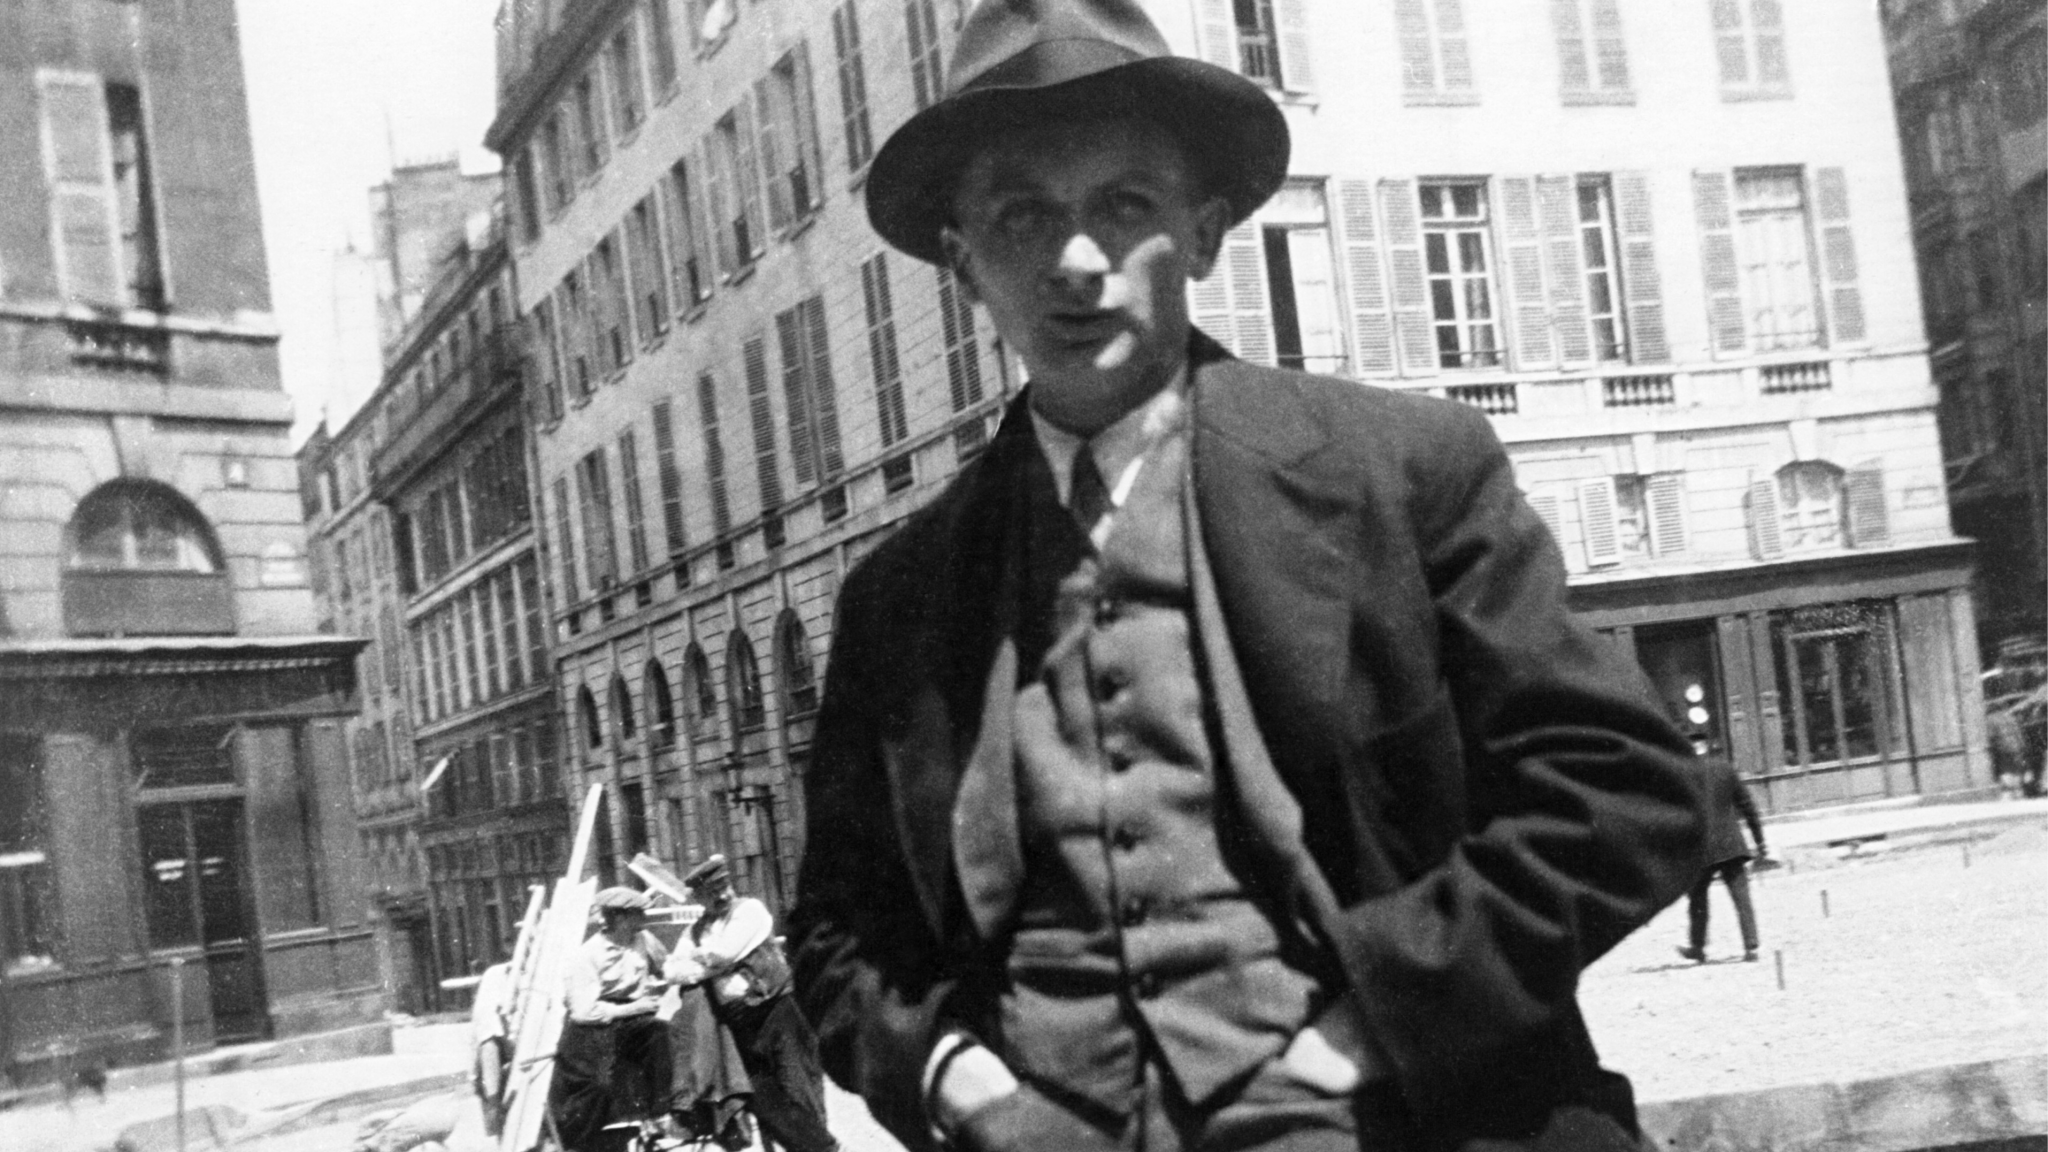 Endless Flight — a long overdue biography of Joseph Roth in English